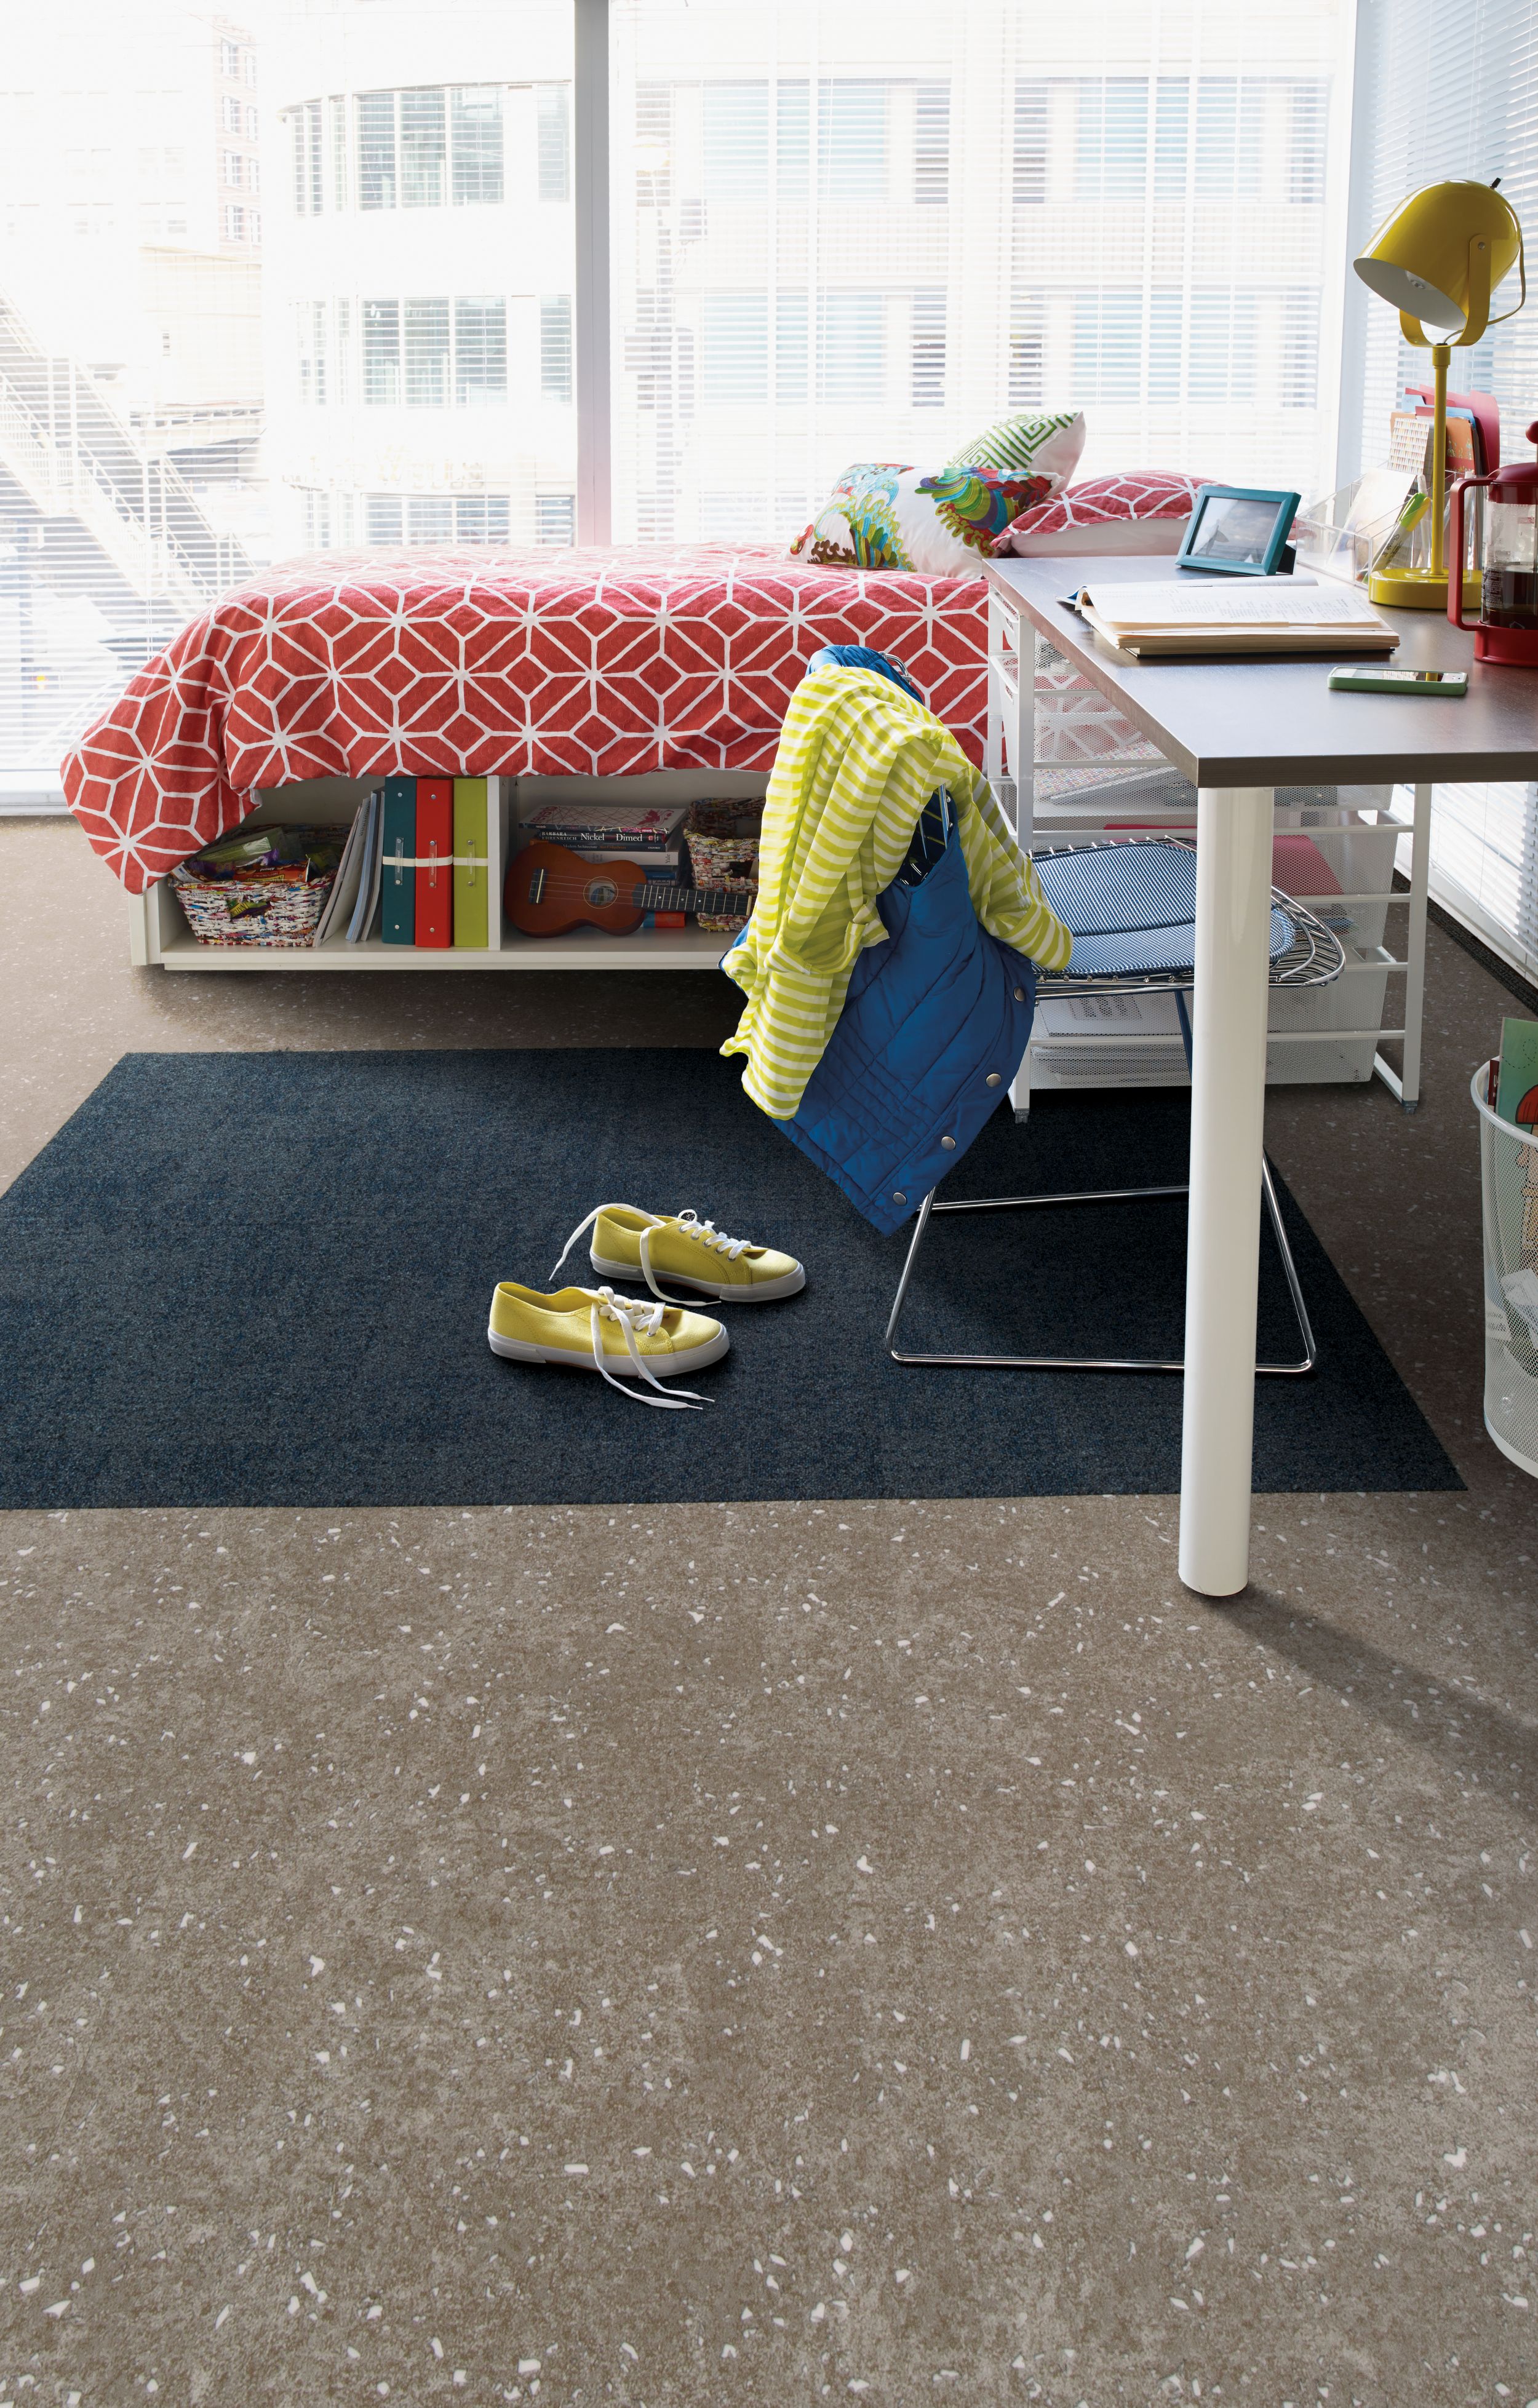 Interface Step in Time carpet tile and Walk the Aisle LVT in a dorm room Bildnummer 13